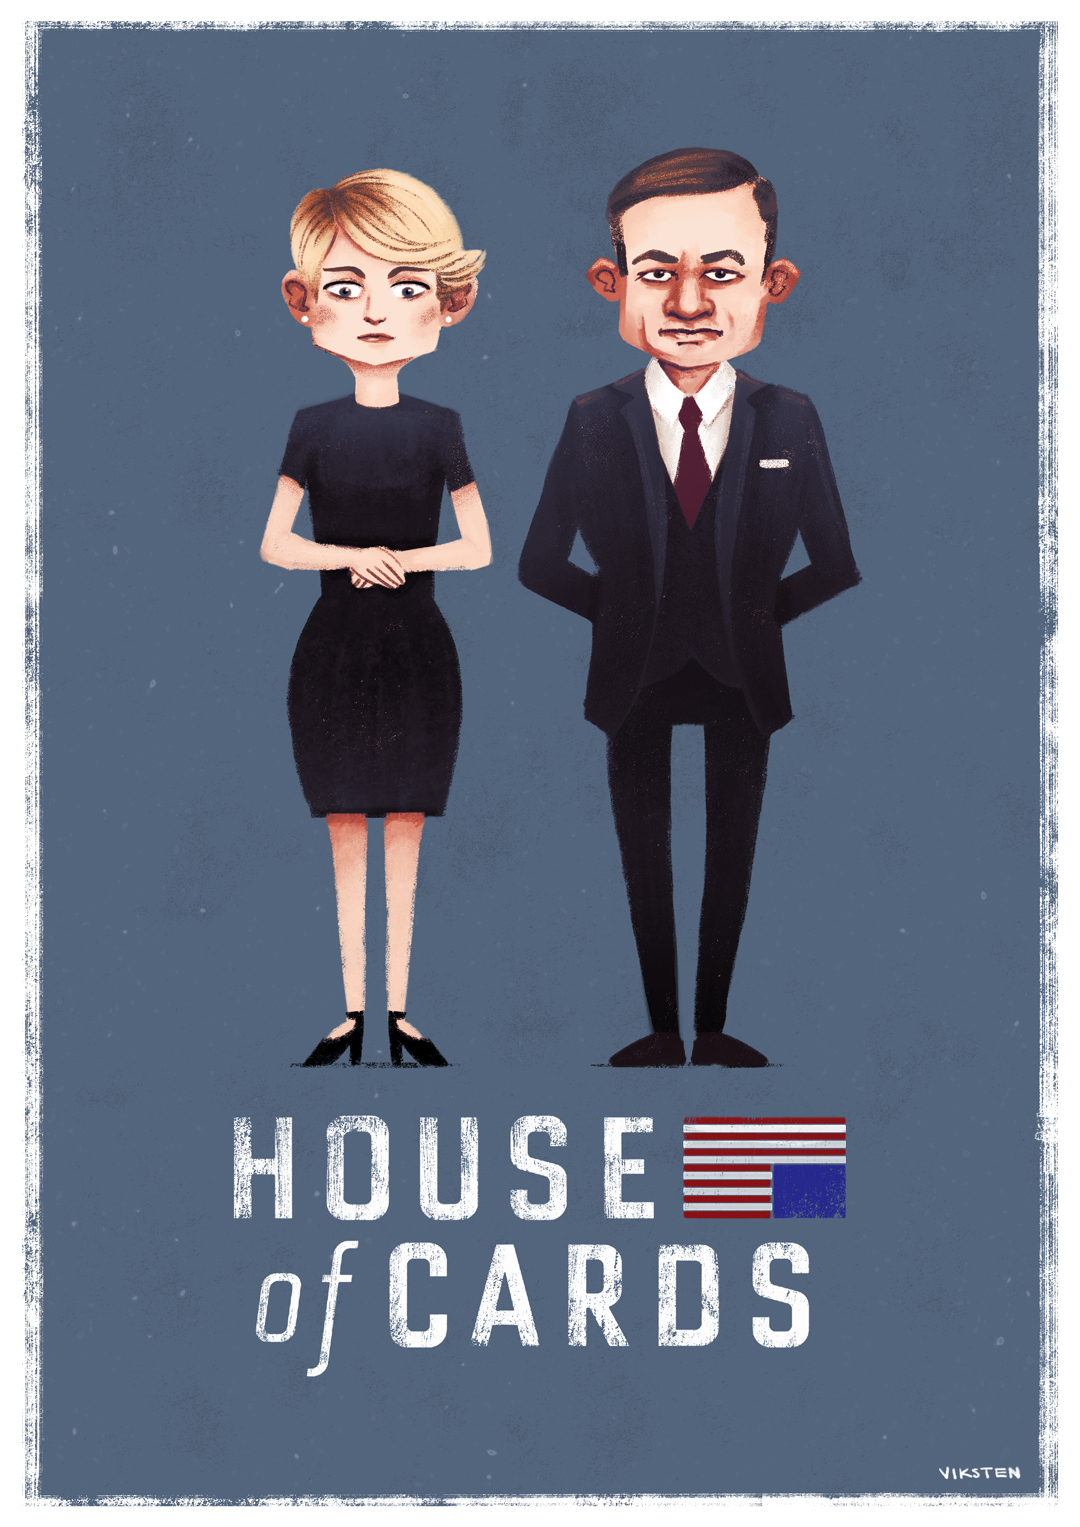 fanart inspired  House of cards - Poster